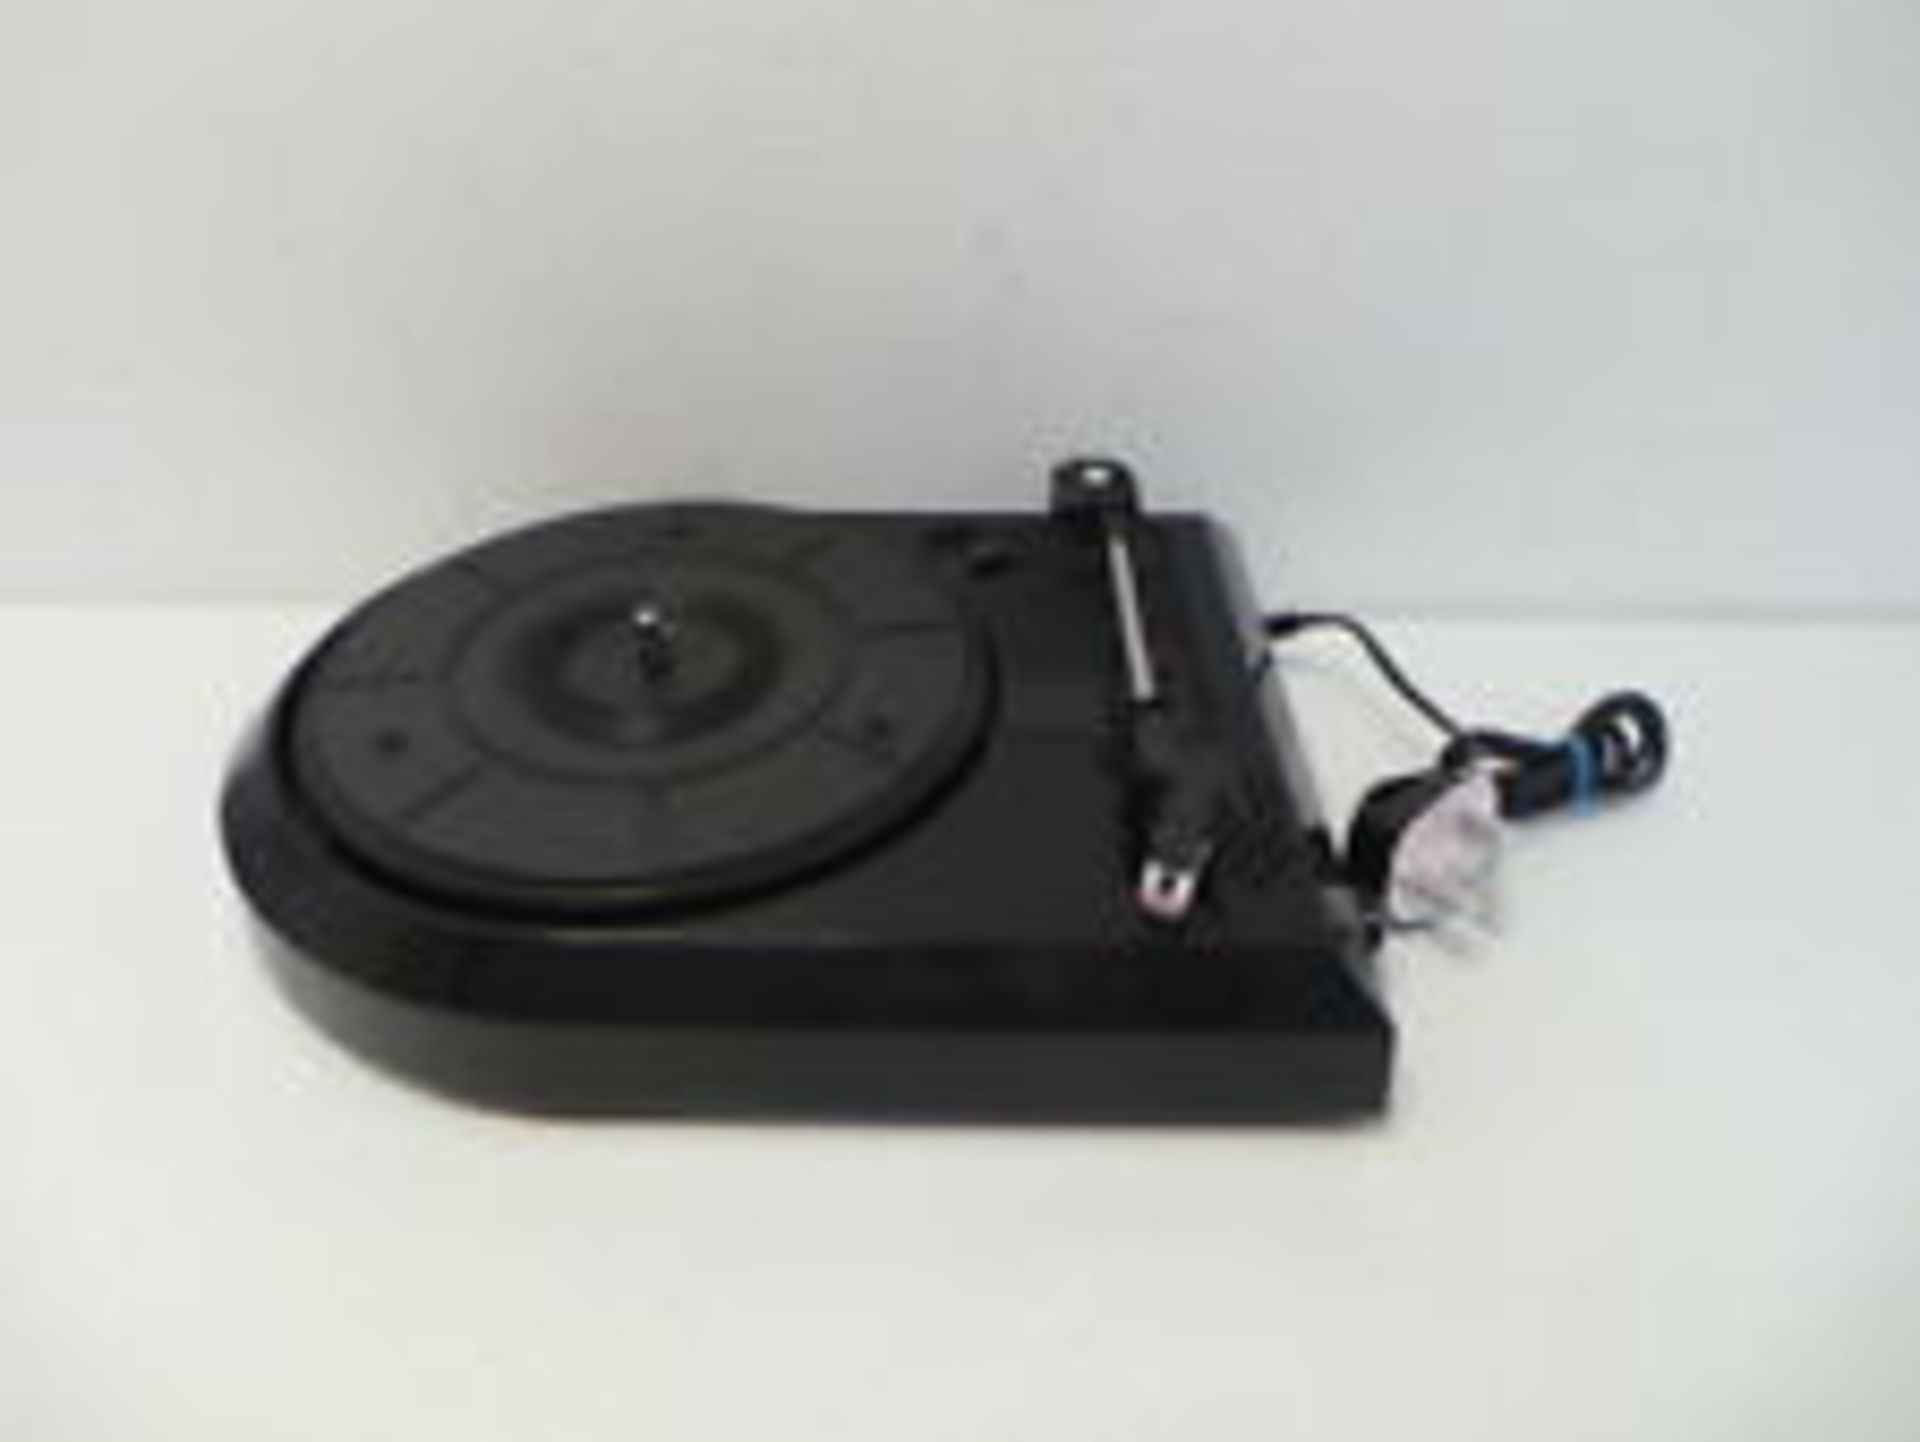 V Brand New Zennox USB Turntable With Built In Speaker With Volume Control Convert LP Records To MP3 - Image 2 of 2